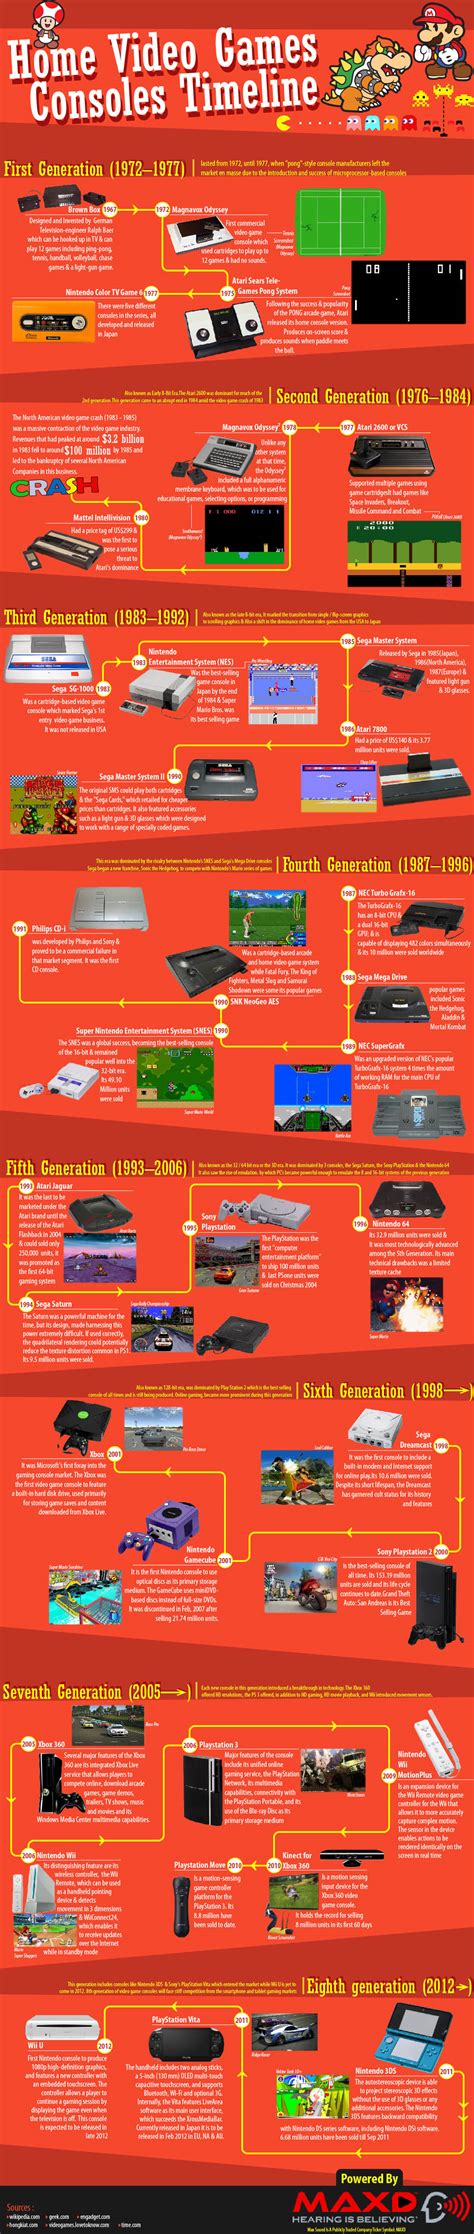 HOME VIDEO GAMES CONSOLES TIMELINE INFOGRAPHIC | Video game console, Timeline infographic, Video ...